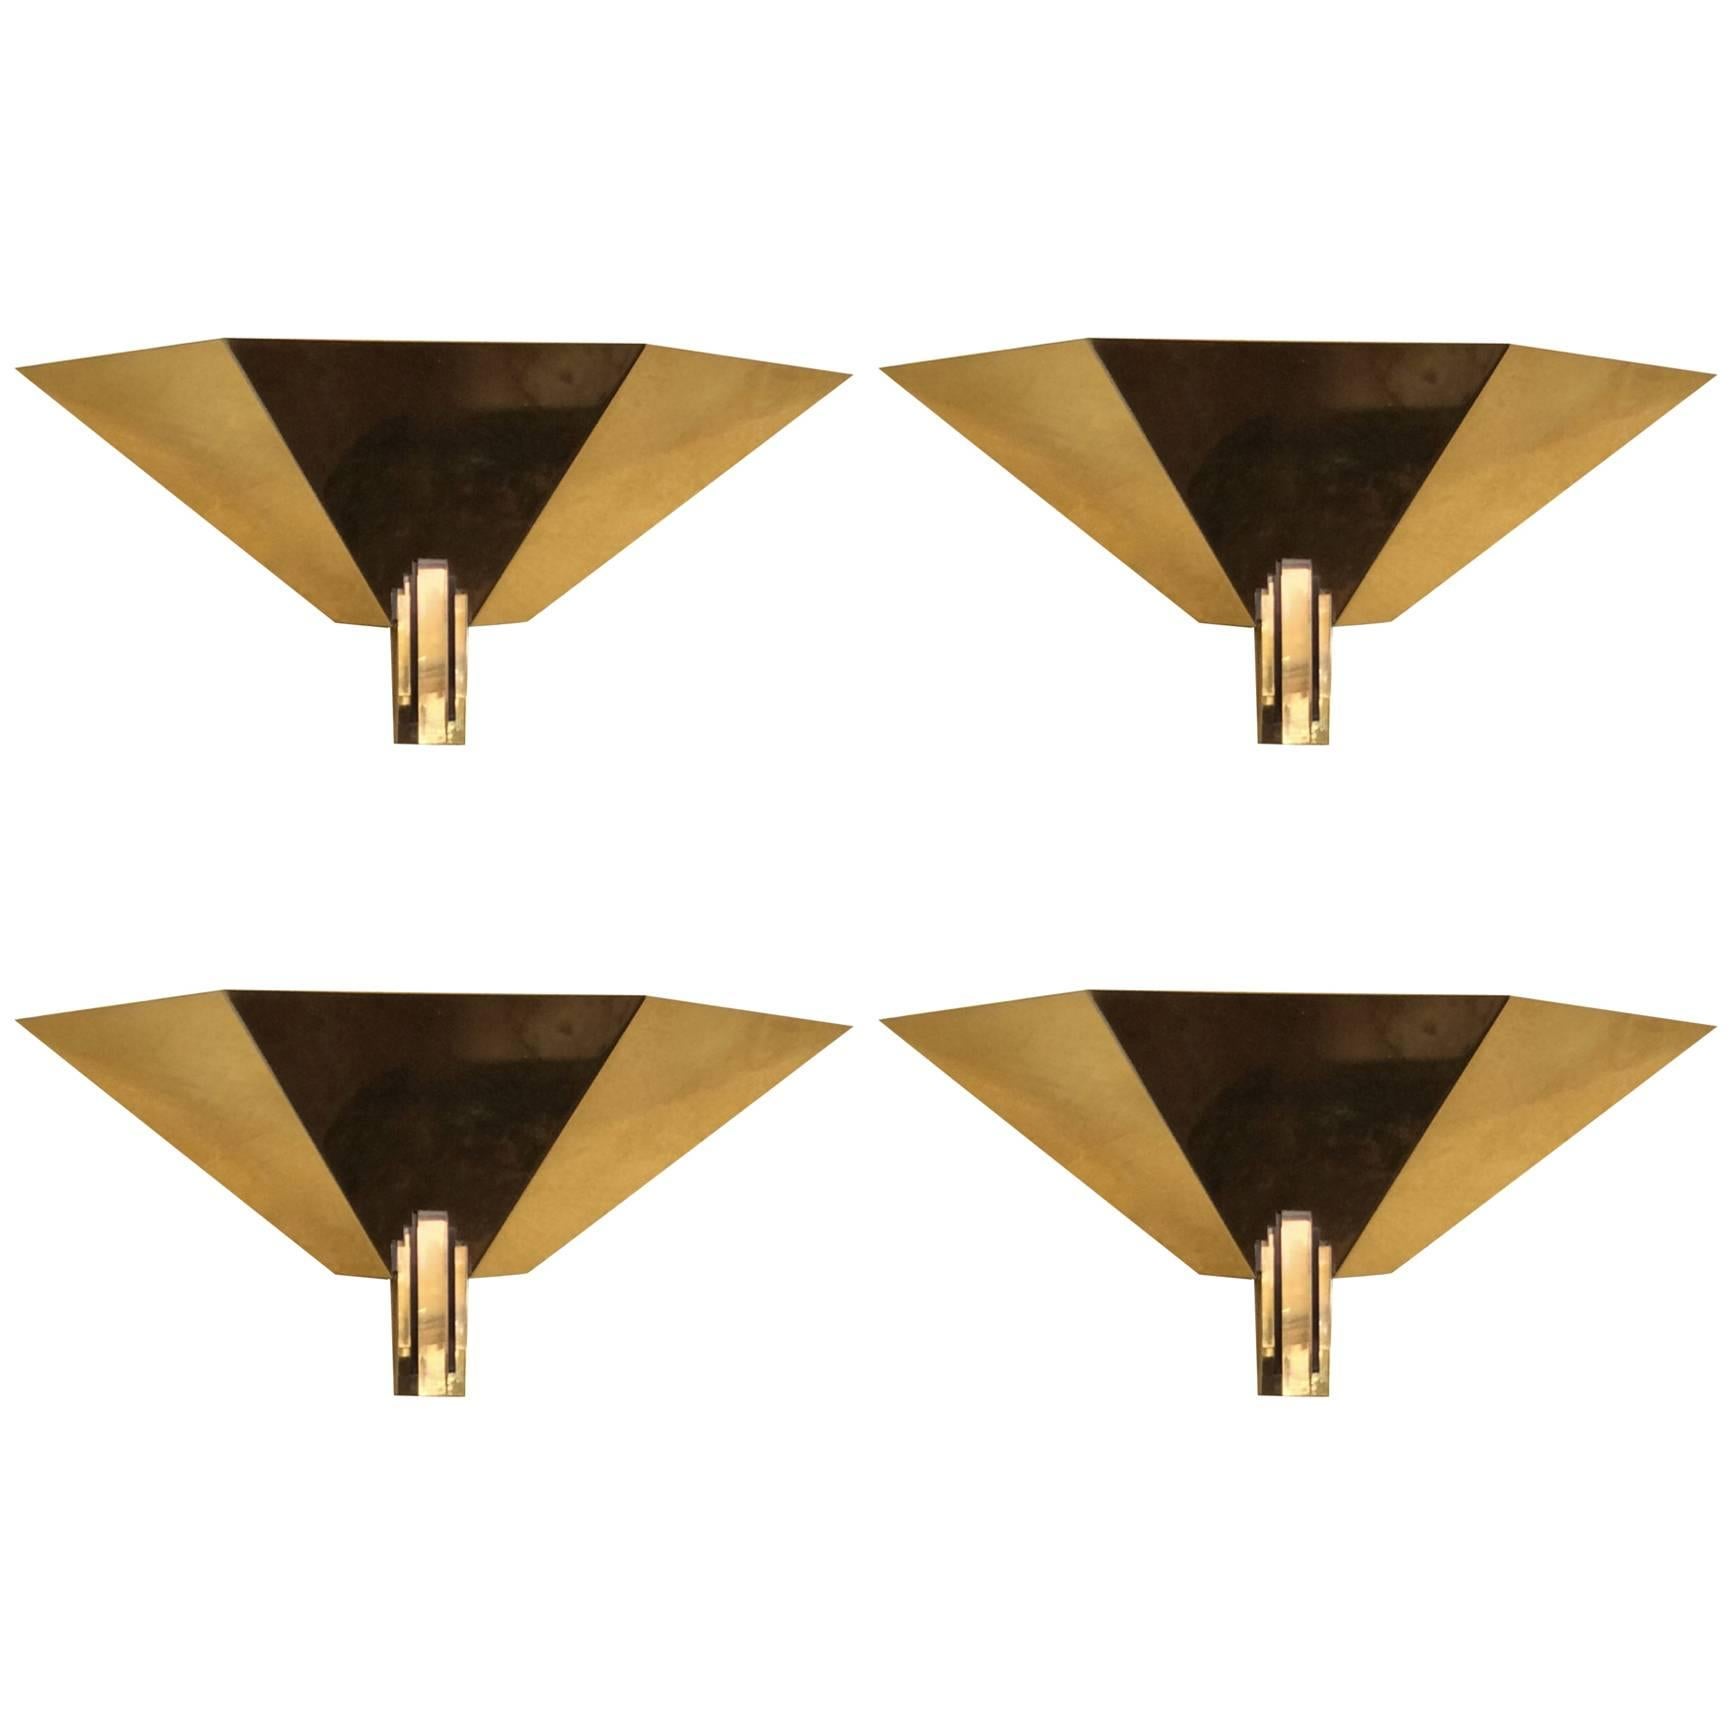 Late 20th Century Italian Brass Sconces with Black & Transparent Lucite Details